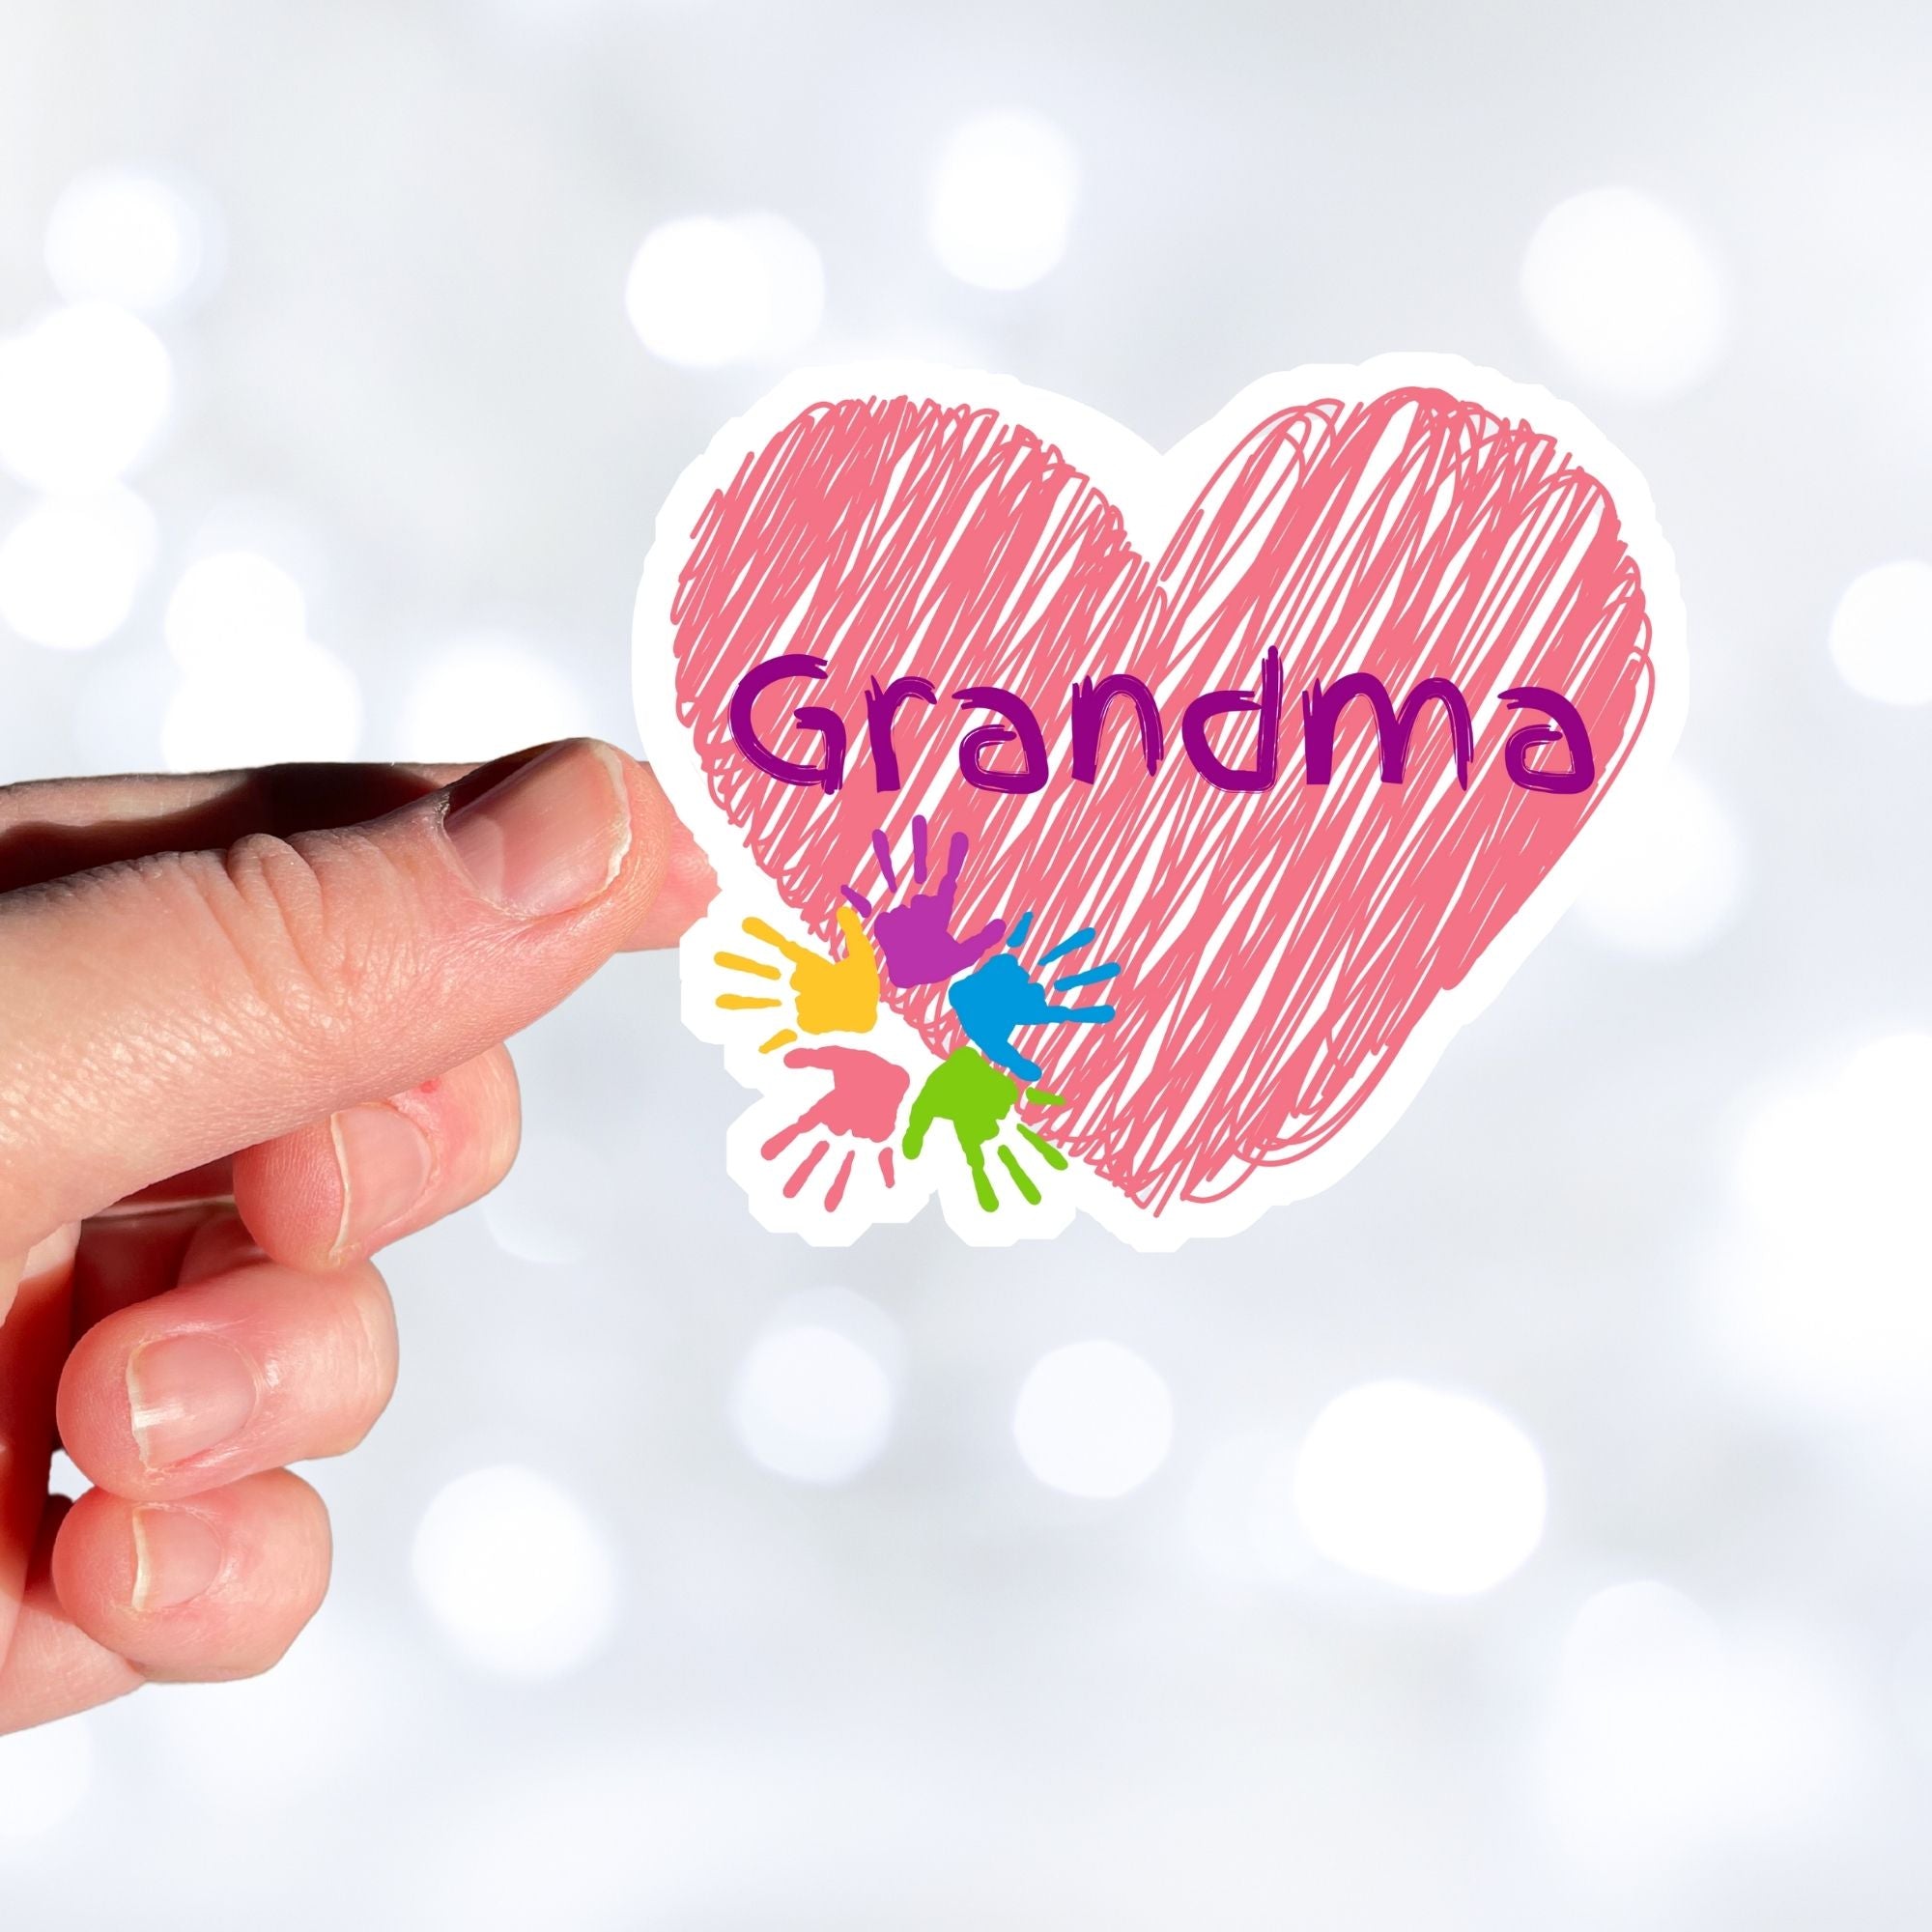 Show how much you love grandma with this individual die-cut sticker. This makes a great gift for grandma, or for all grandma's to proudly show they are a grandmother! This sticker features a red scribbled heart with Grandma written across the middle and 5 small paint hands on the lower left side. This image shows a hand holding the Grandma sticker.